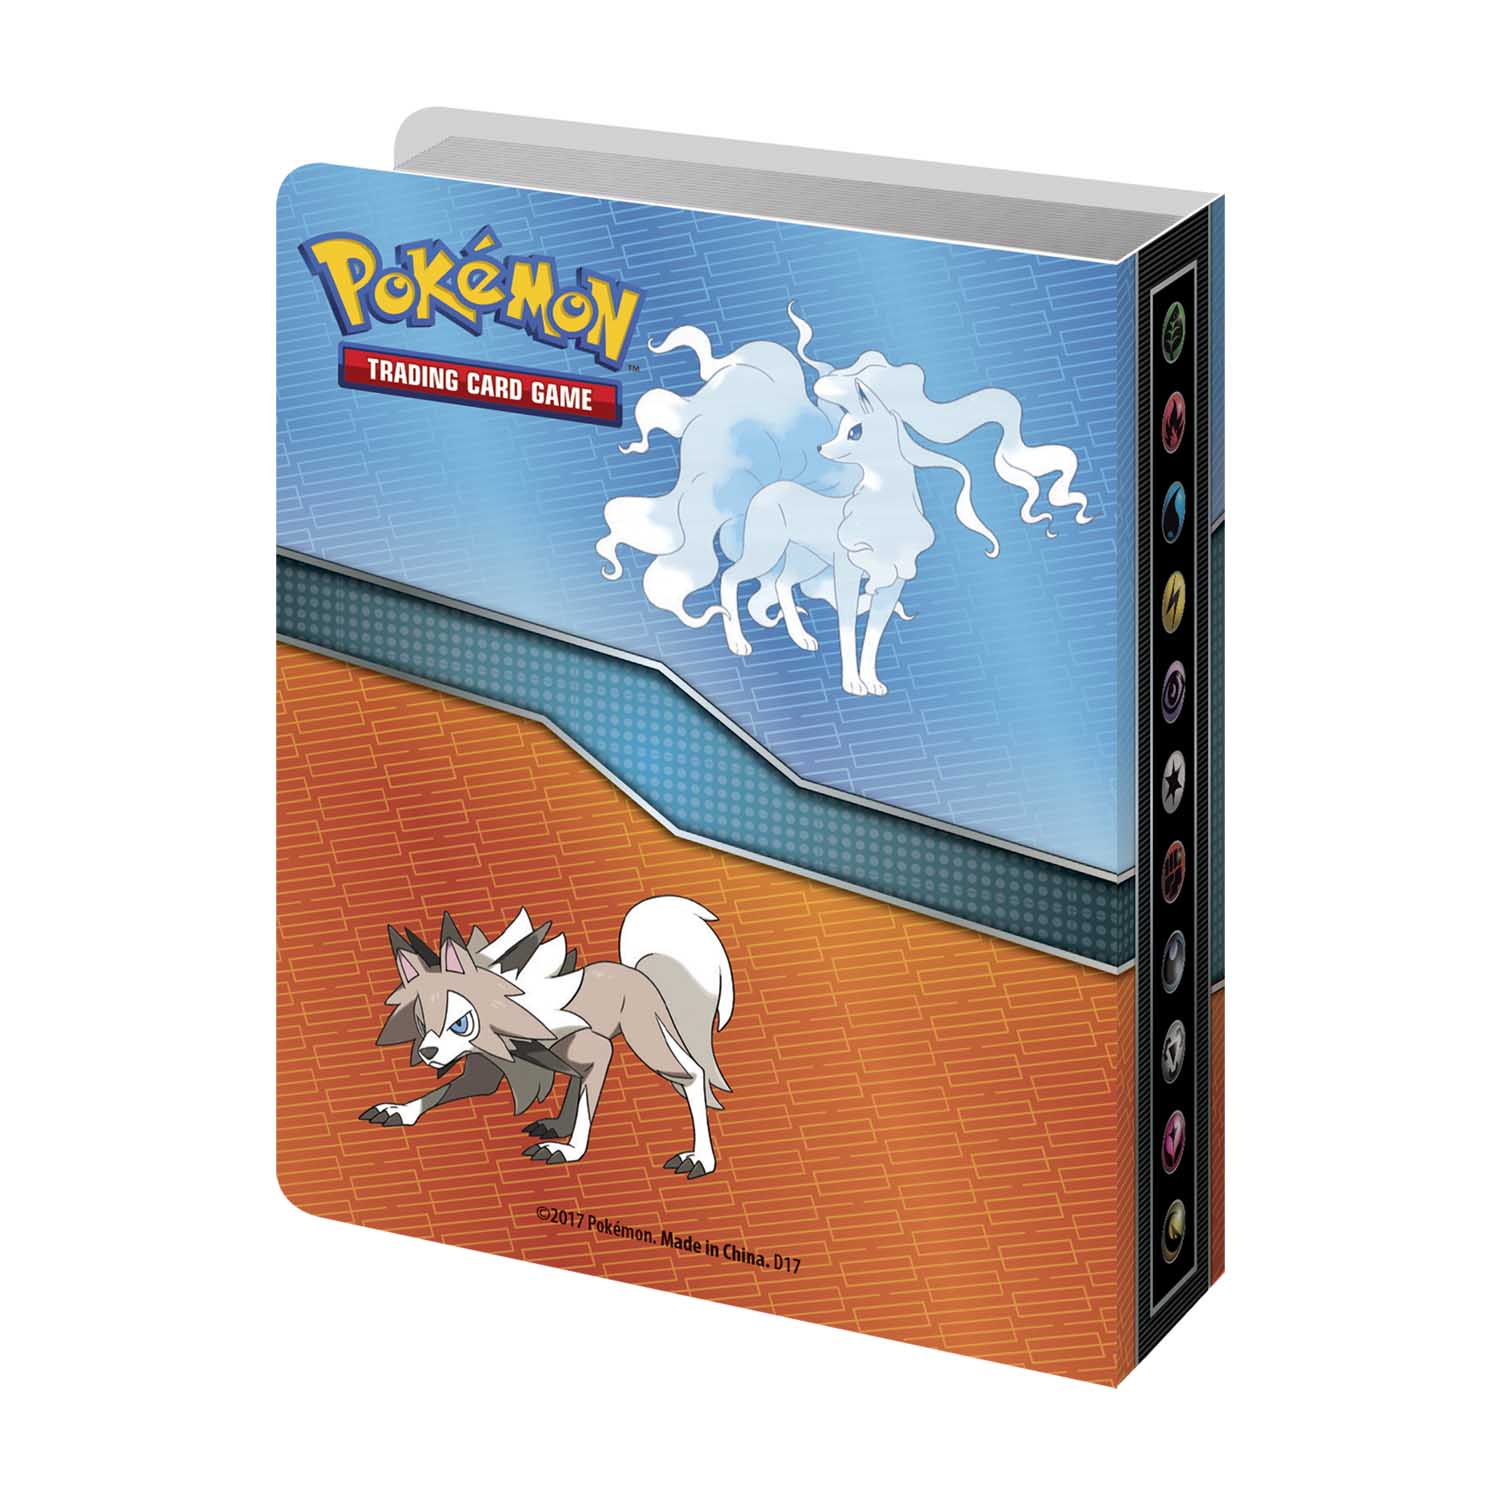 1 Burning Shadows Booster Pokemon collectors Album holds 60 cards incl 